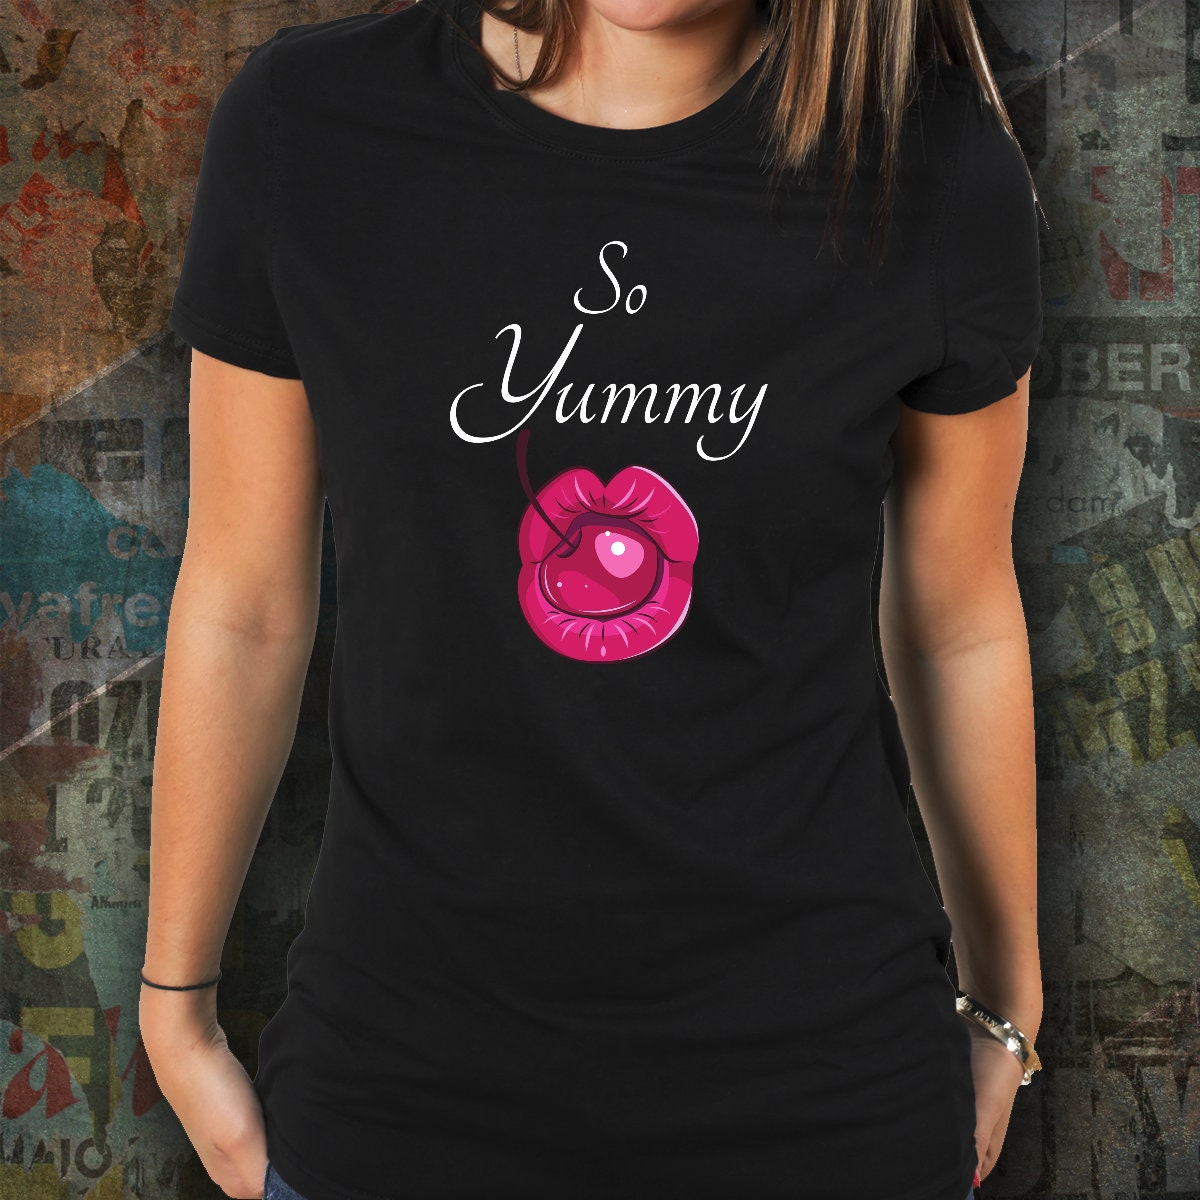 So Yummy Naughty Lips Around A Cherry Graphic Tee Black or image